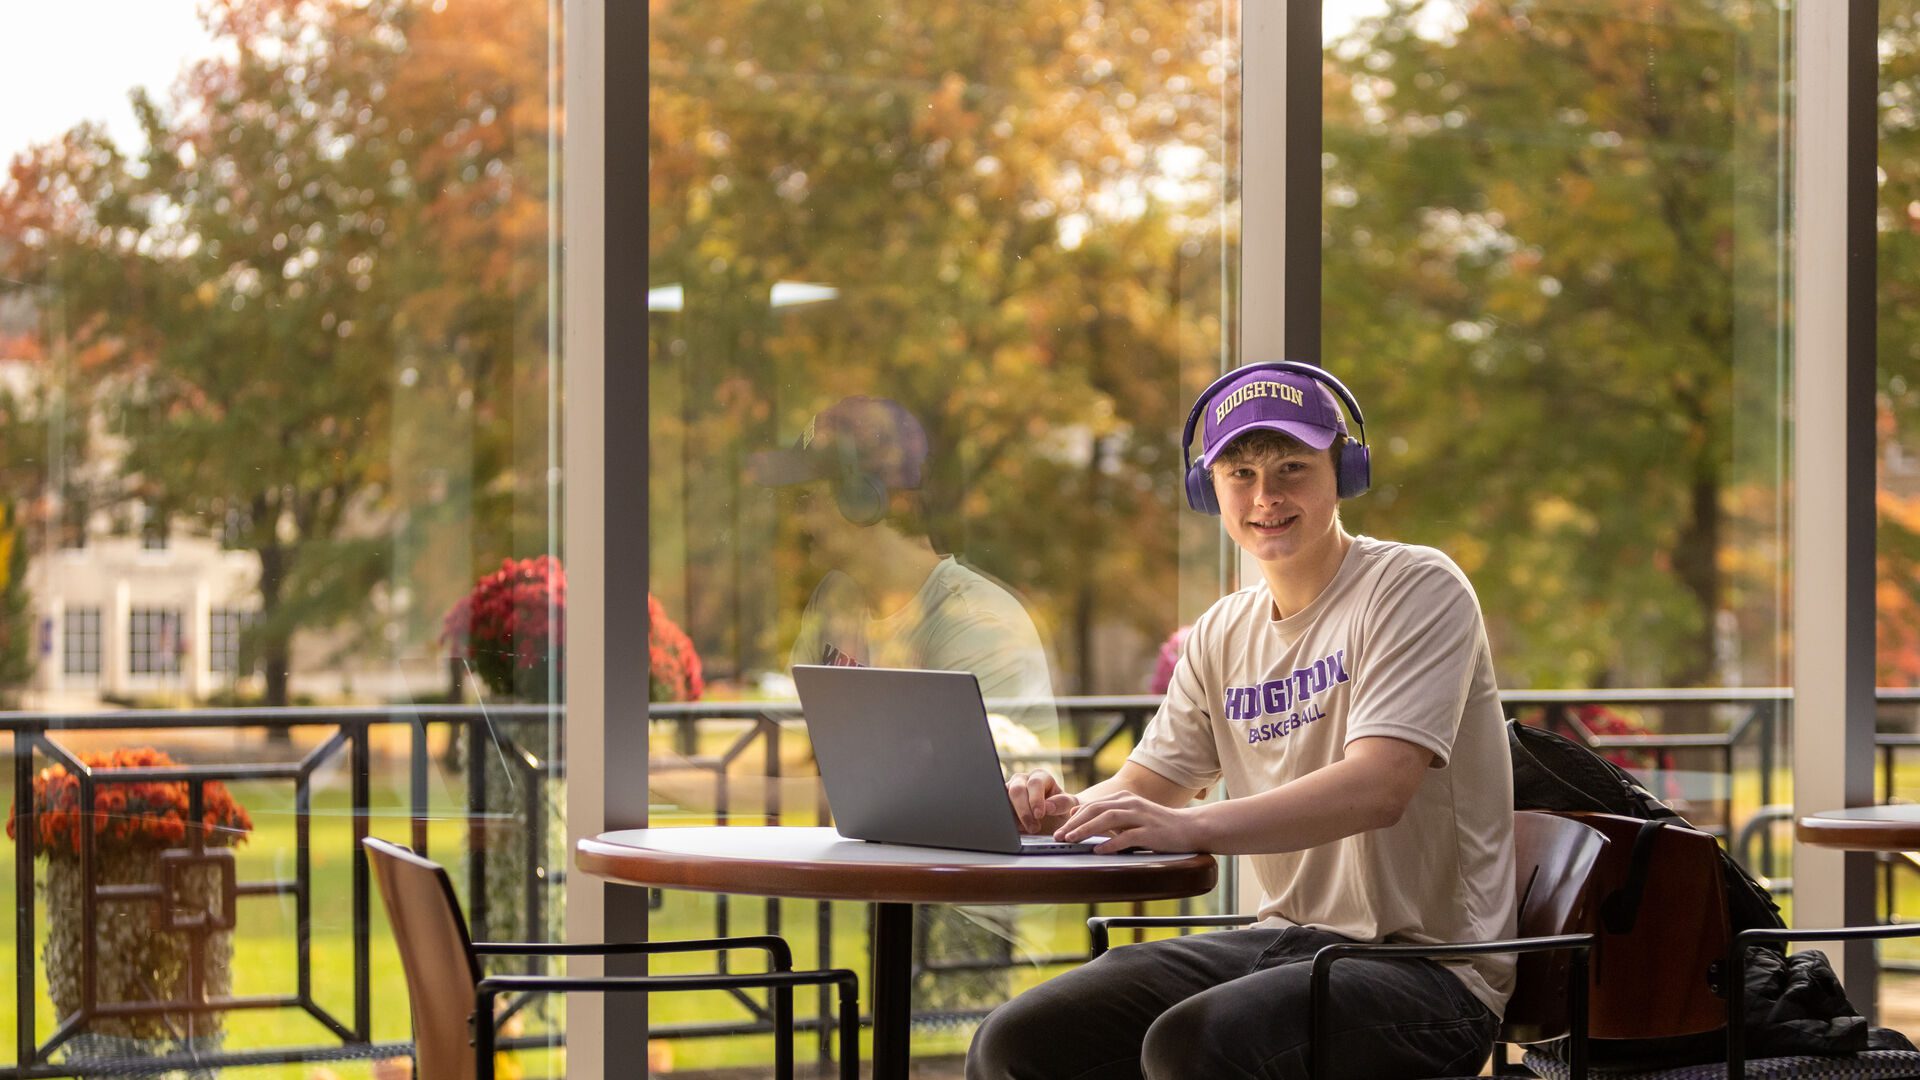 Houghton student sitting at table with laptop, wearing Houghton hat and tshirt.